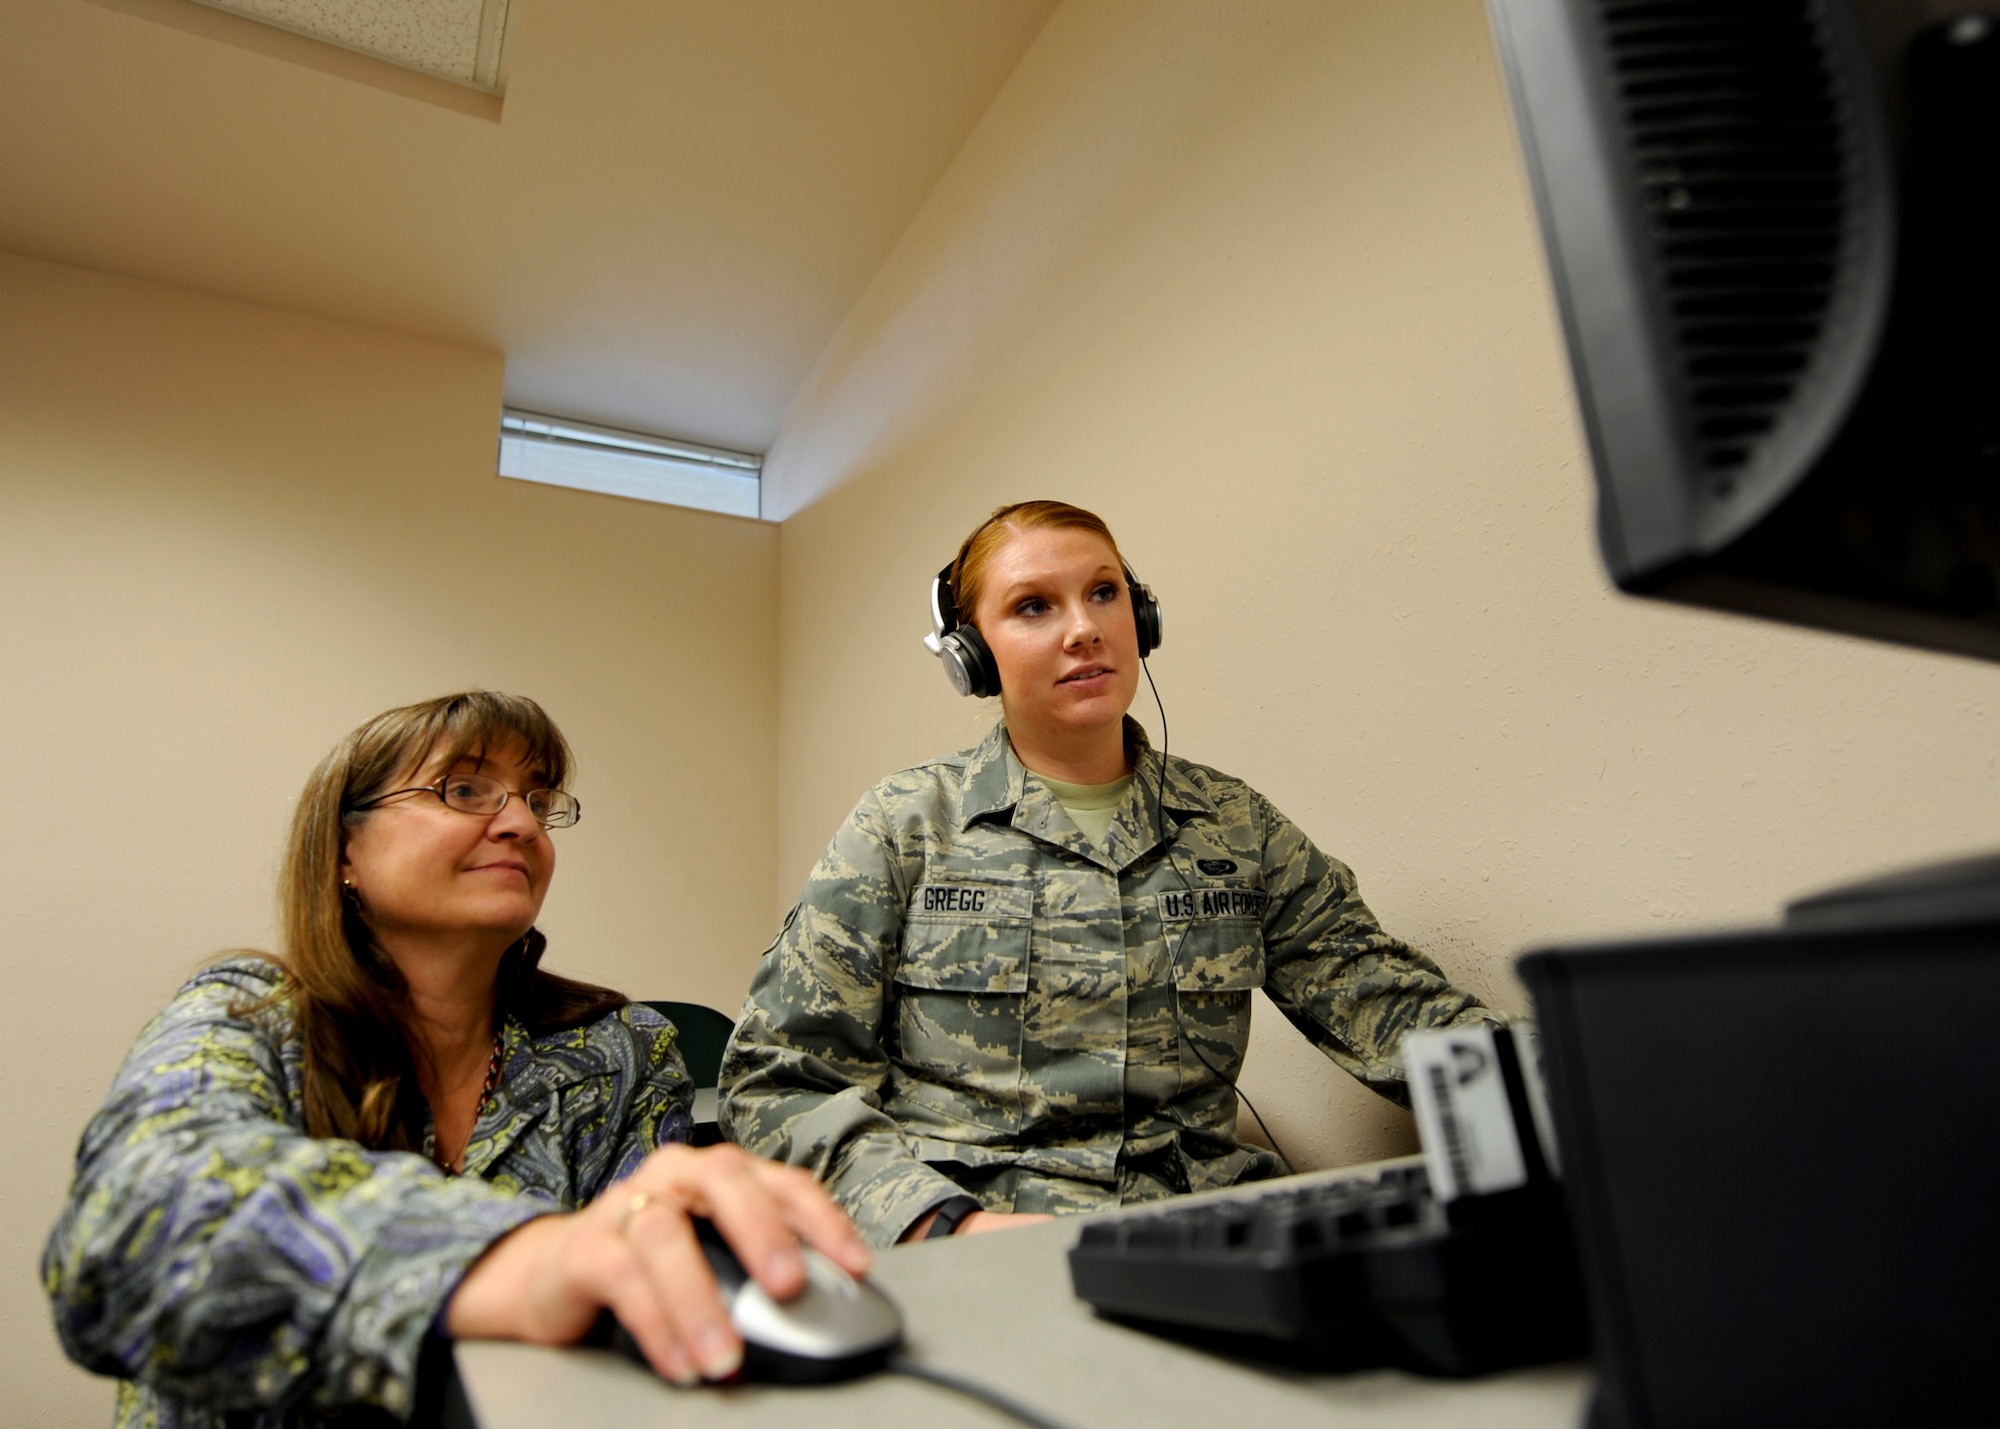 Becky Mays, 28th Force Support Squadron test control officer, assists Airman 1st Class Danielle Gregg, 28th FSS commander support staff apprentice, with taking a Defense Language Aptitude Battery at Ellsworth Air Force Base, S.D., Nov. 19, 2013. As a way of assessing an Airman’s ability to speak, understand and learn new languages, the Air Force administers the Defense Language Proficiency Test and Defense Language Aptitude Battery. (U.S. Air Force photo by Senior Airman Anania Tekurio/Released)